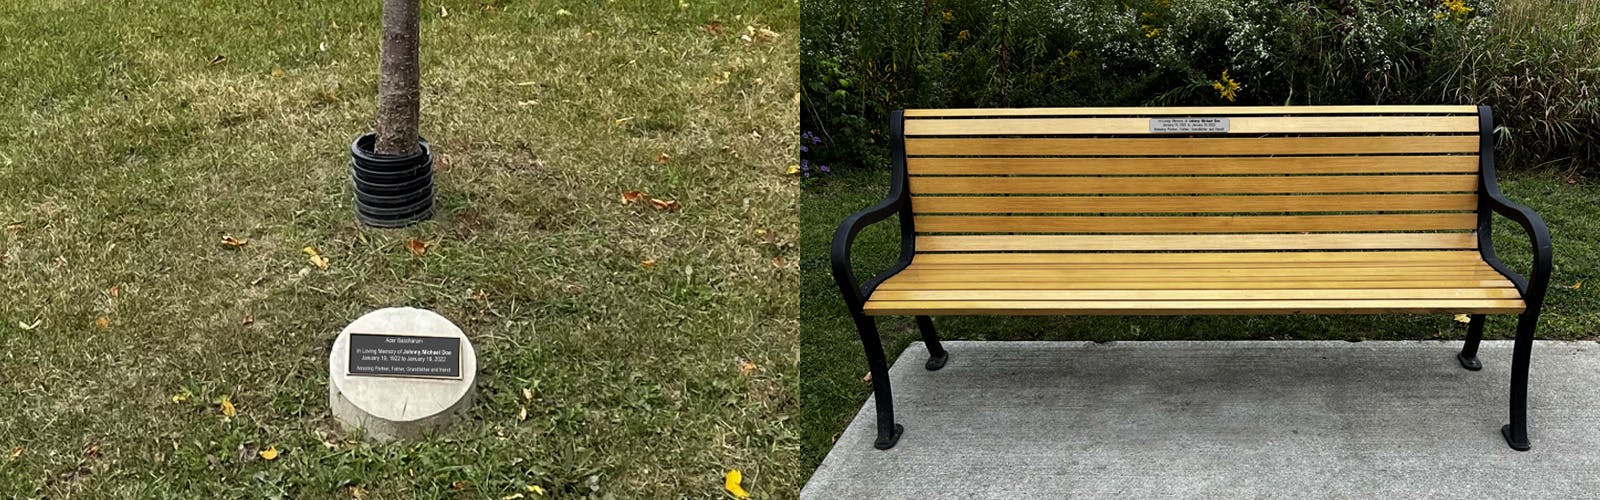 Tree and Bench examples for the Whitby dedication program